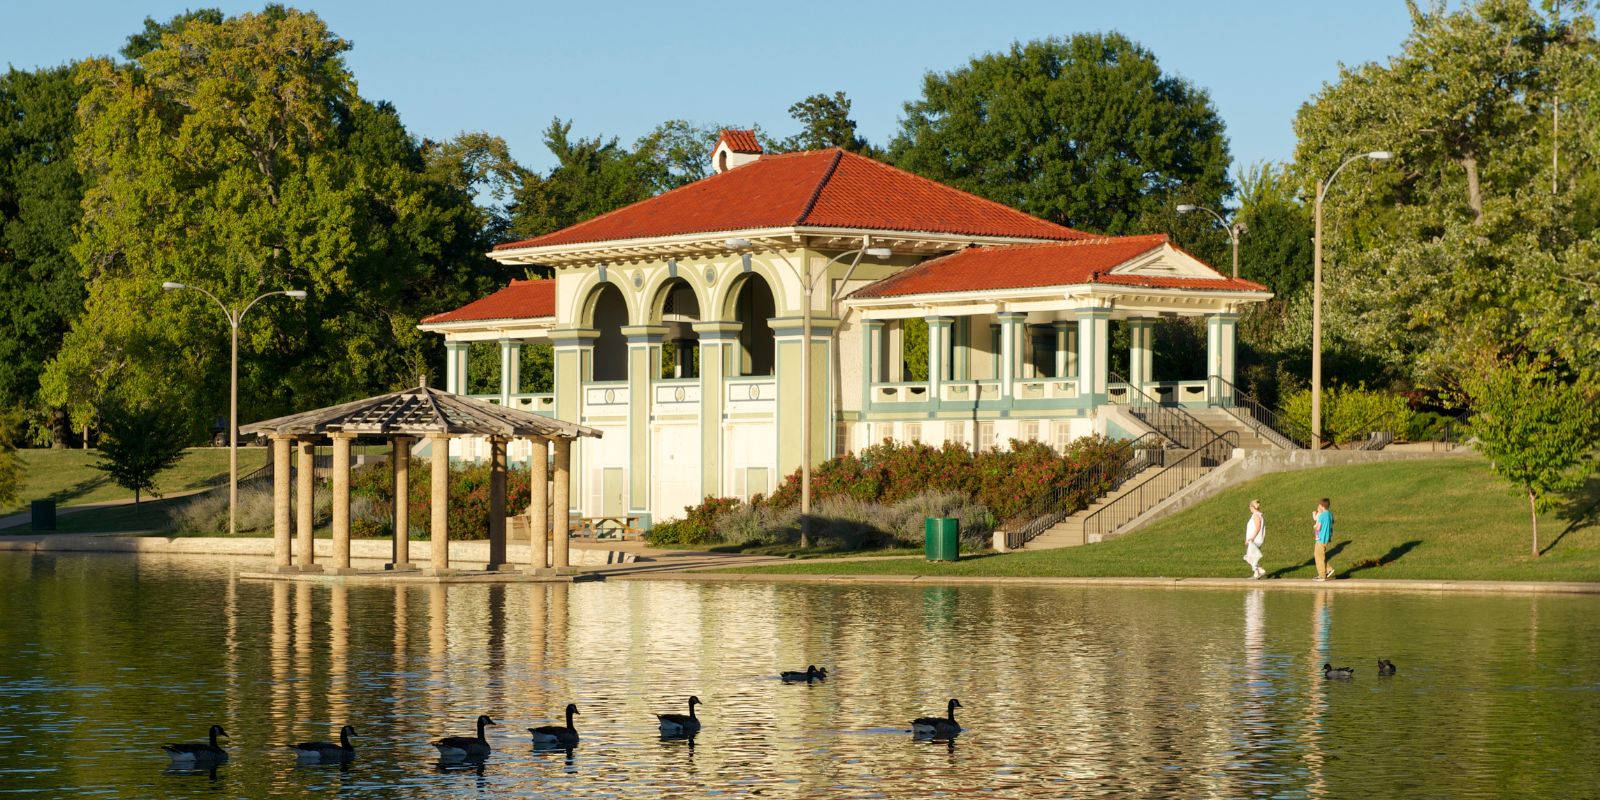 On sunny days, residents and visitors alike enjoy spending time in Carondelet Park in St. Louis.